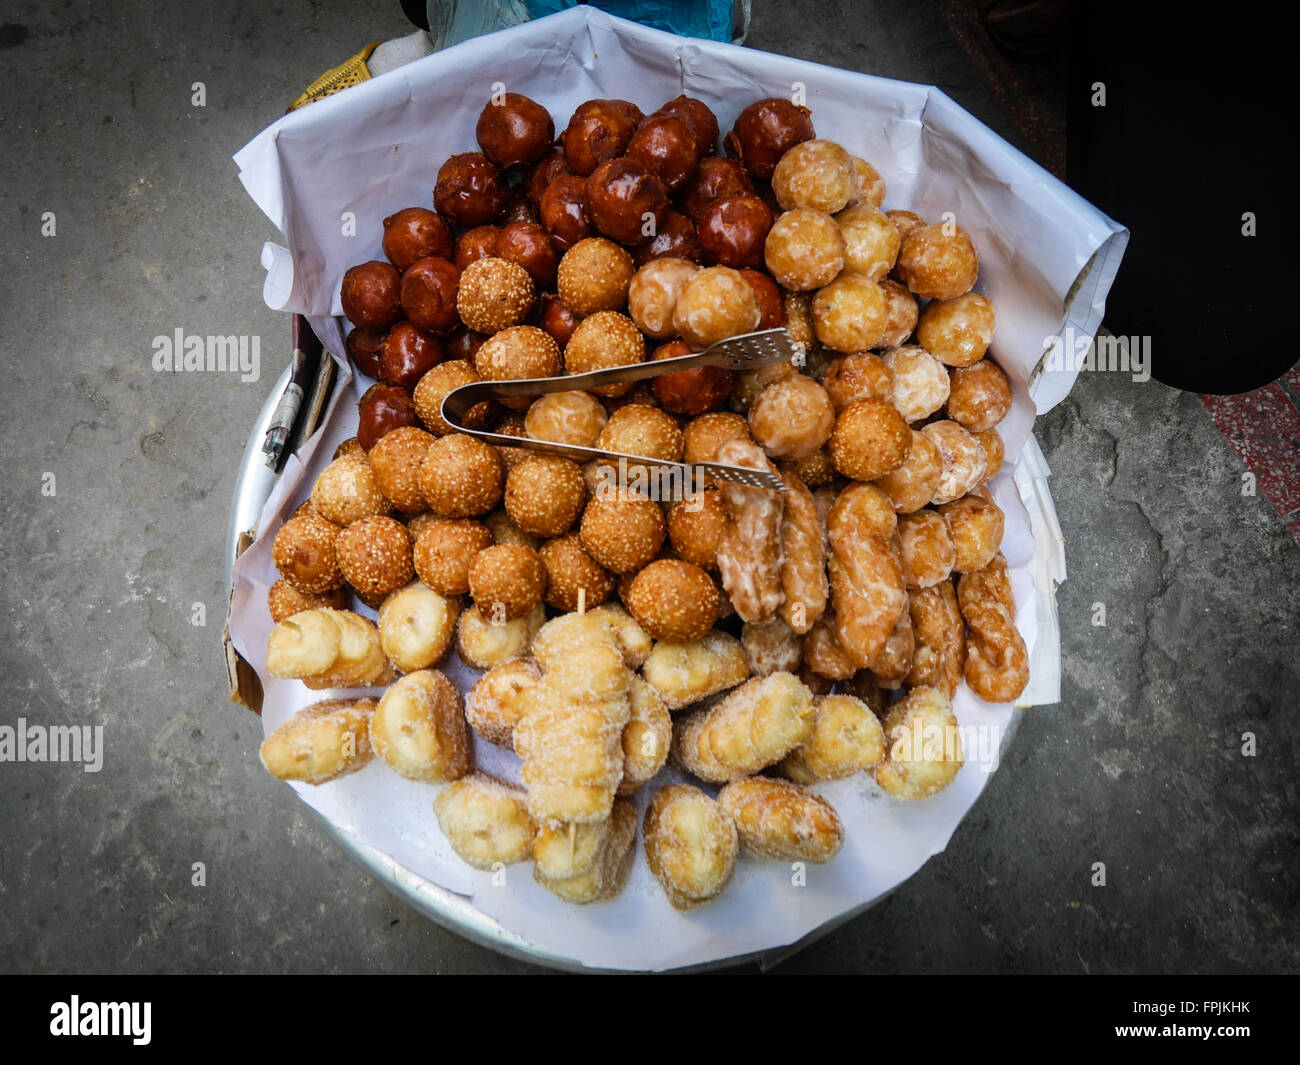 Donuts from a street vendor Stock Photo